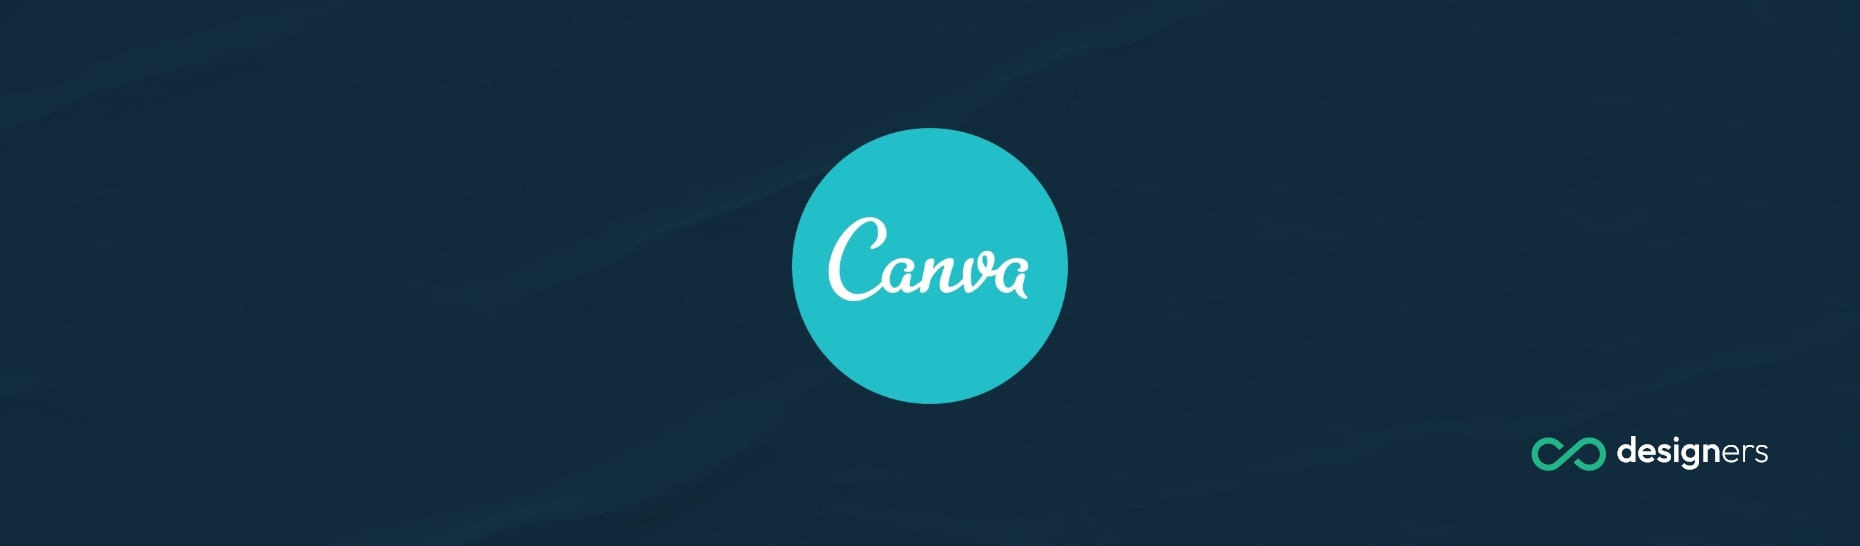 Does Canva Do Refunds?